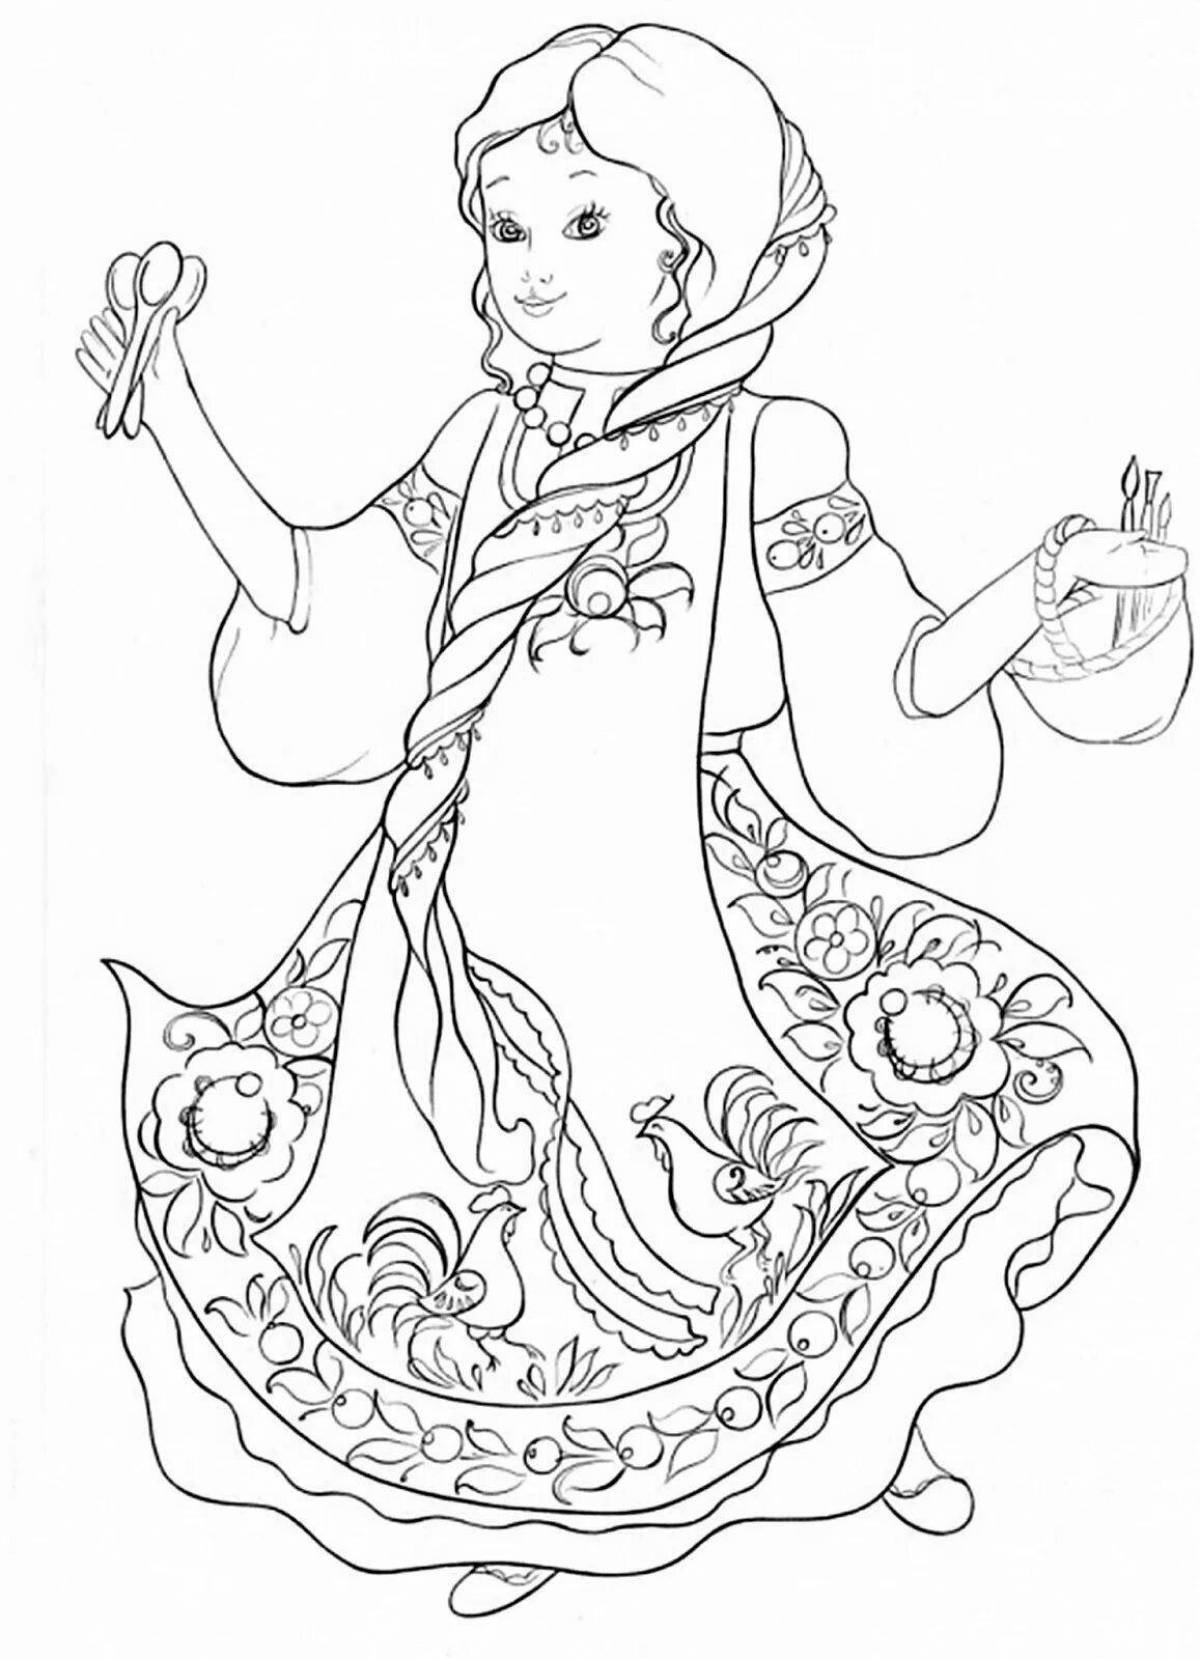 Fun coloring book based on Bazhov's fairy tales for preschoolers